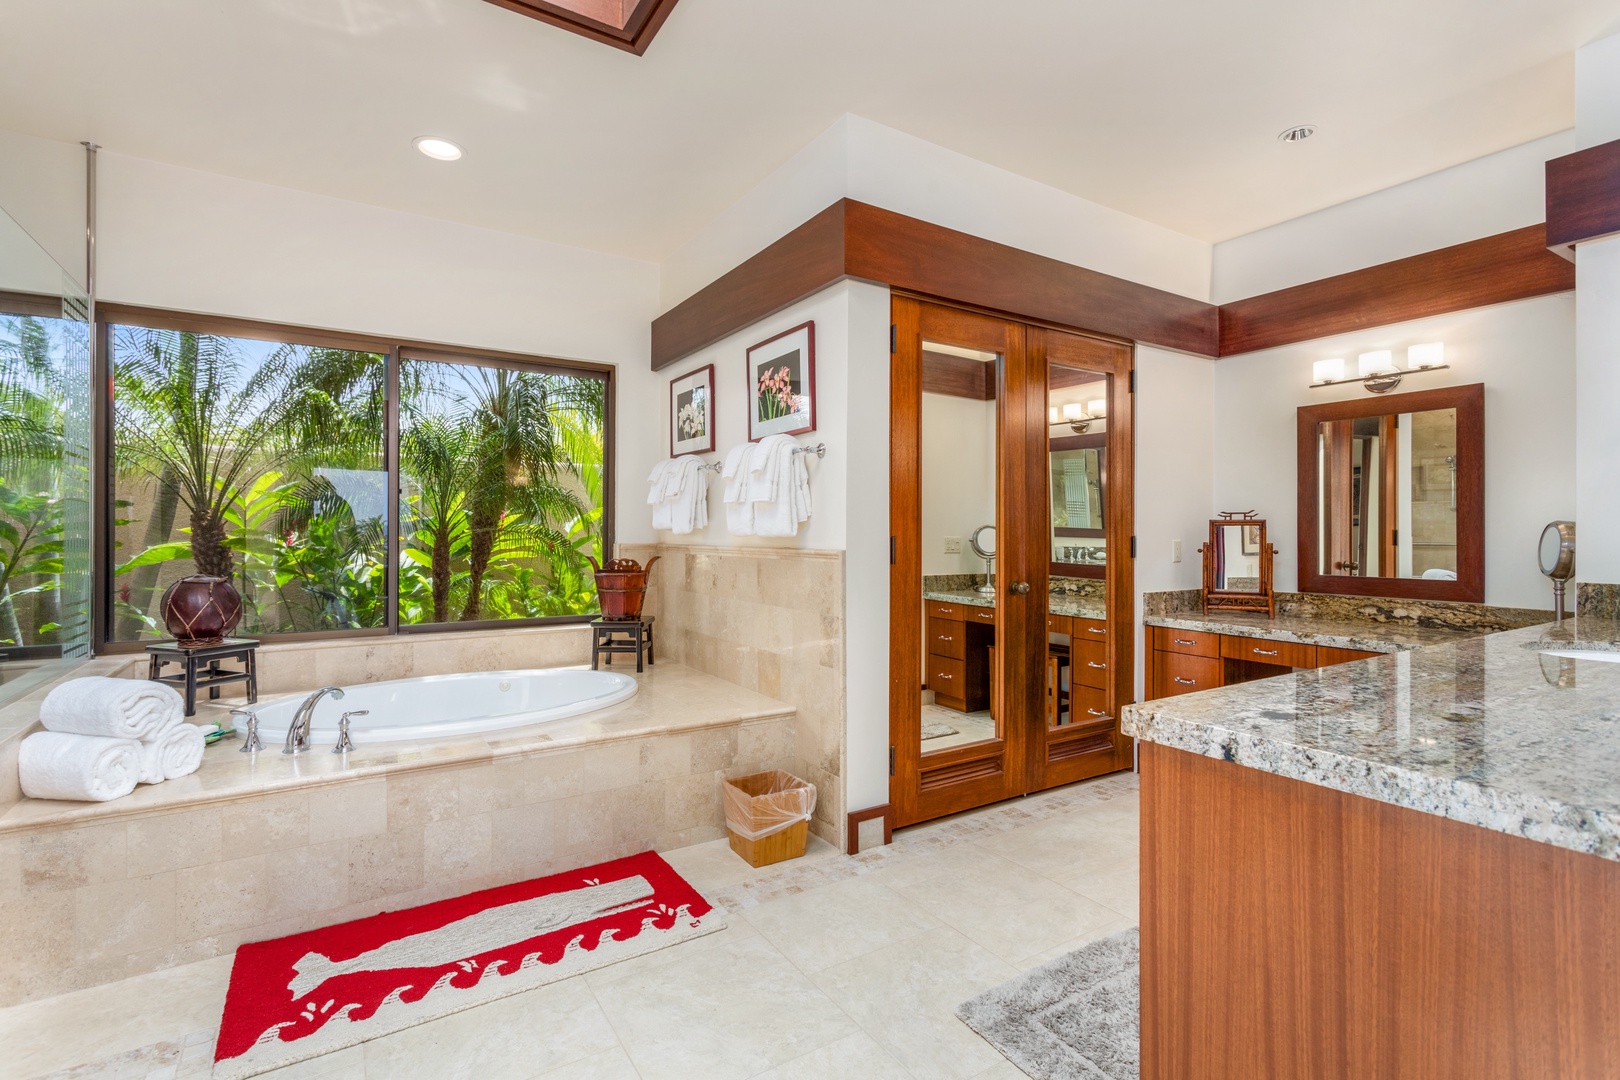 Kamuela Vacation Rentals, 3BD Villas (39) at Mauna Kea Resort - Primary bathroom with soaking tub, dual vanity, walk-in shower, and separate commode for privacy.